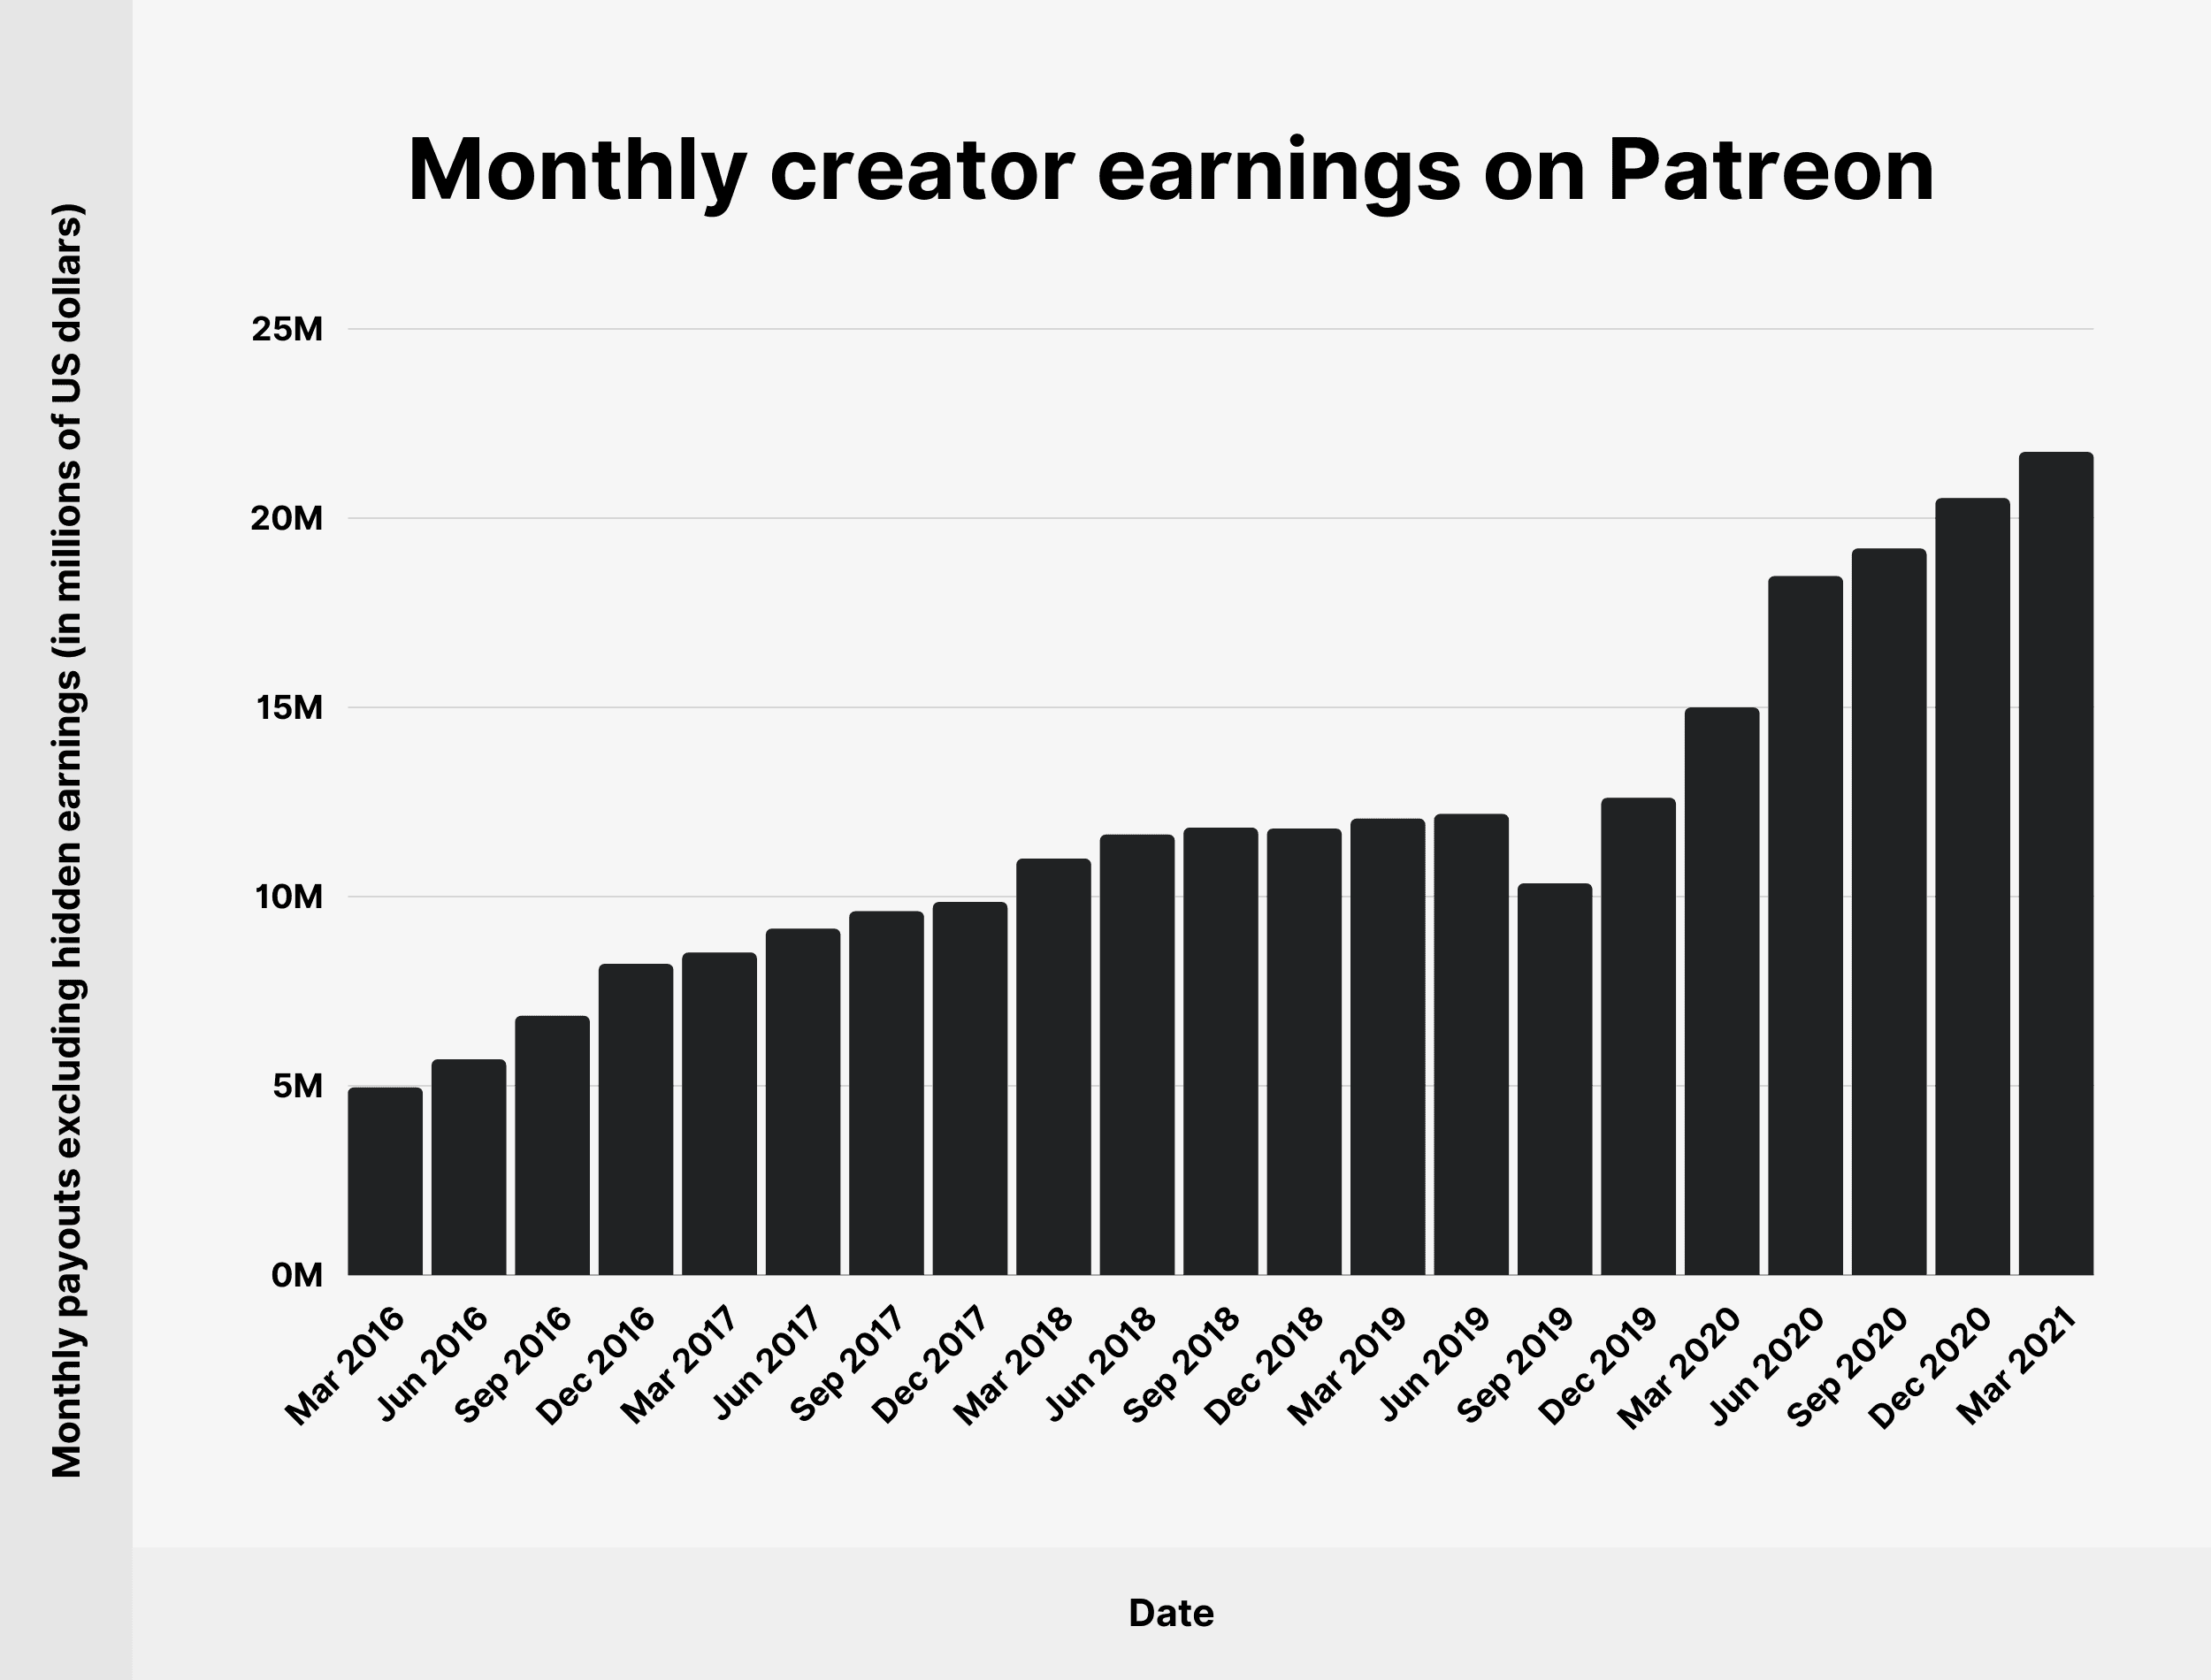 Monthly creator earnings on Patreon